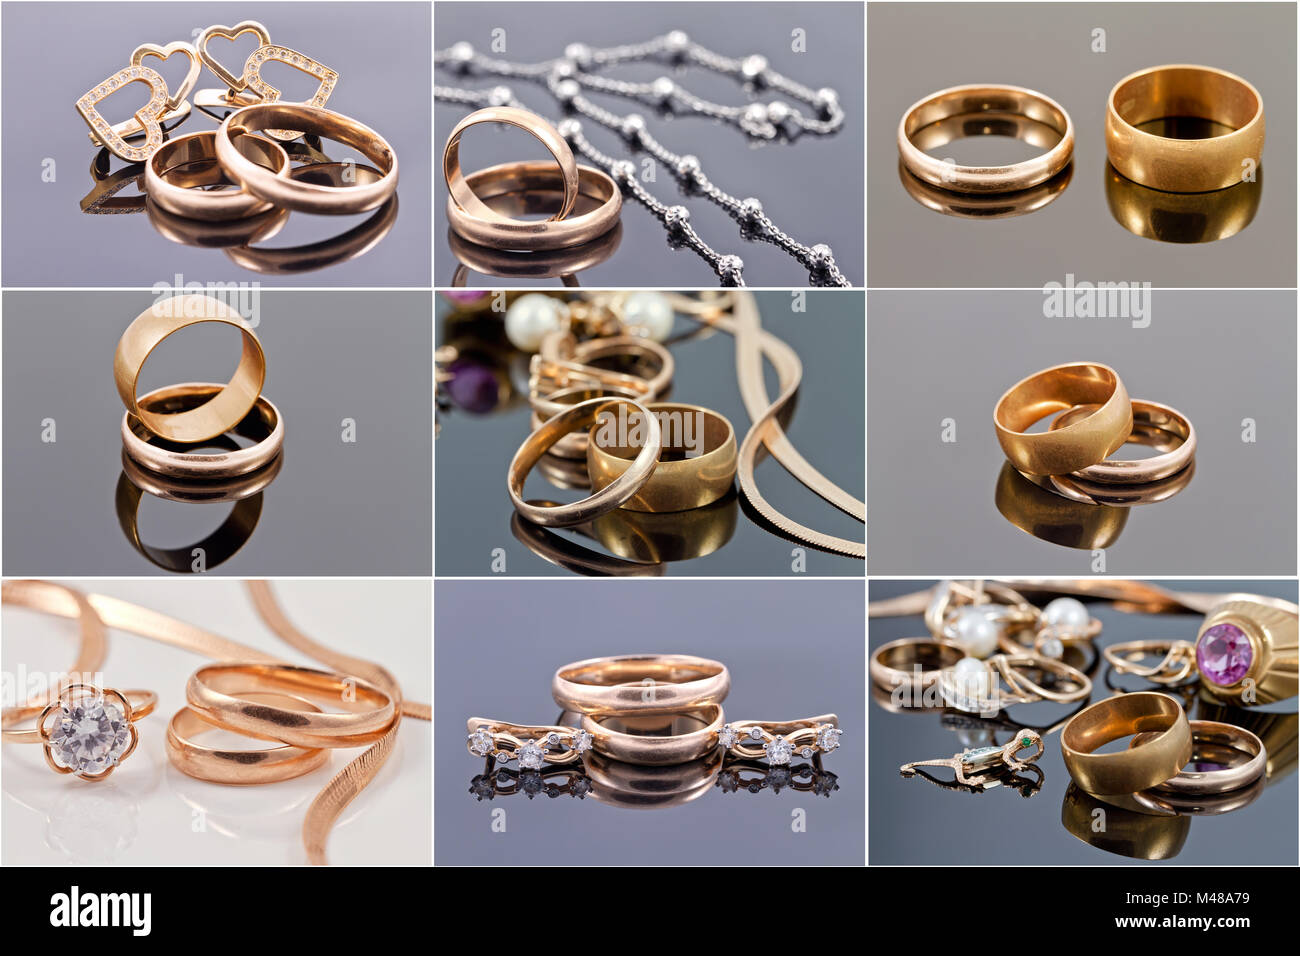 selection of photographs with gold wedding rings and wedding jewelry Stock Photo